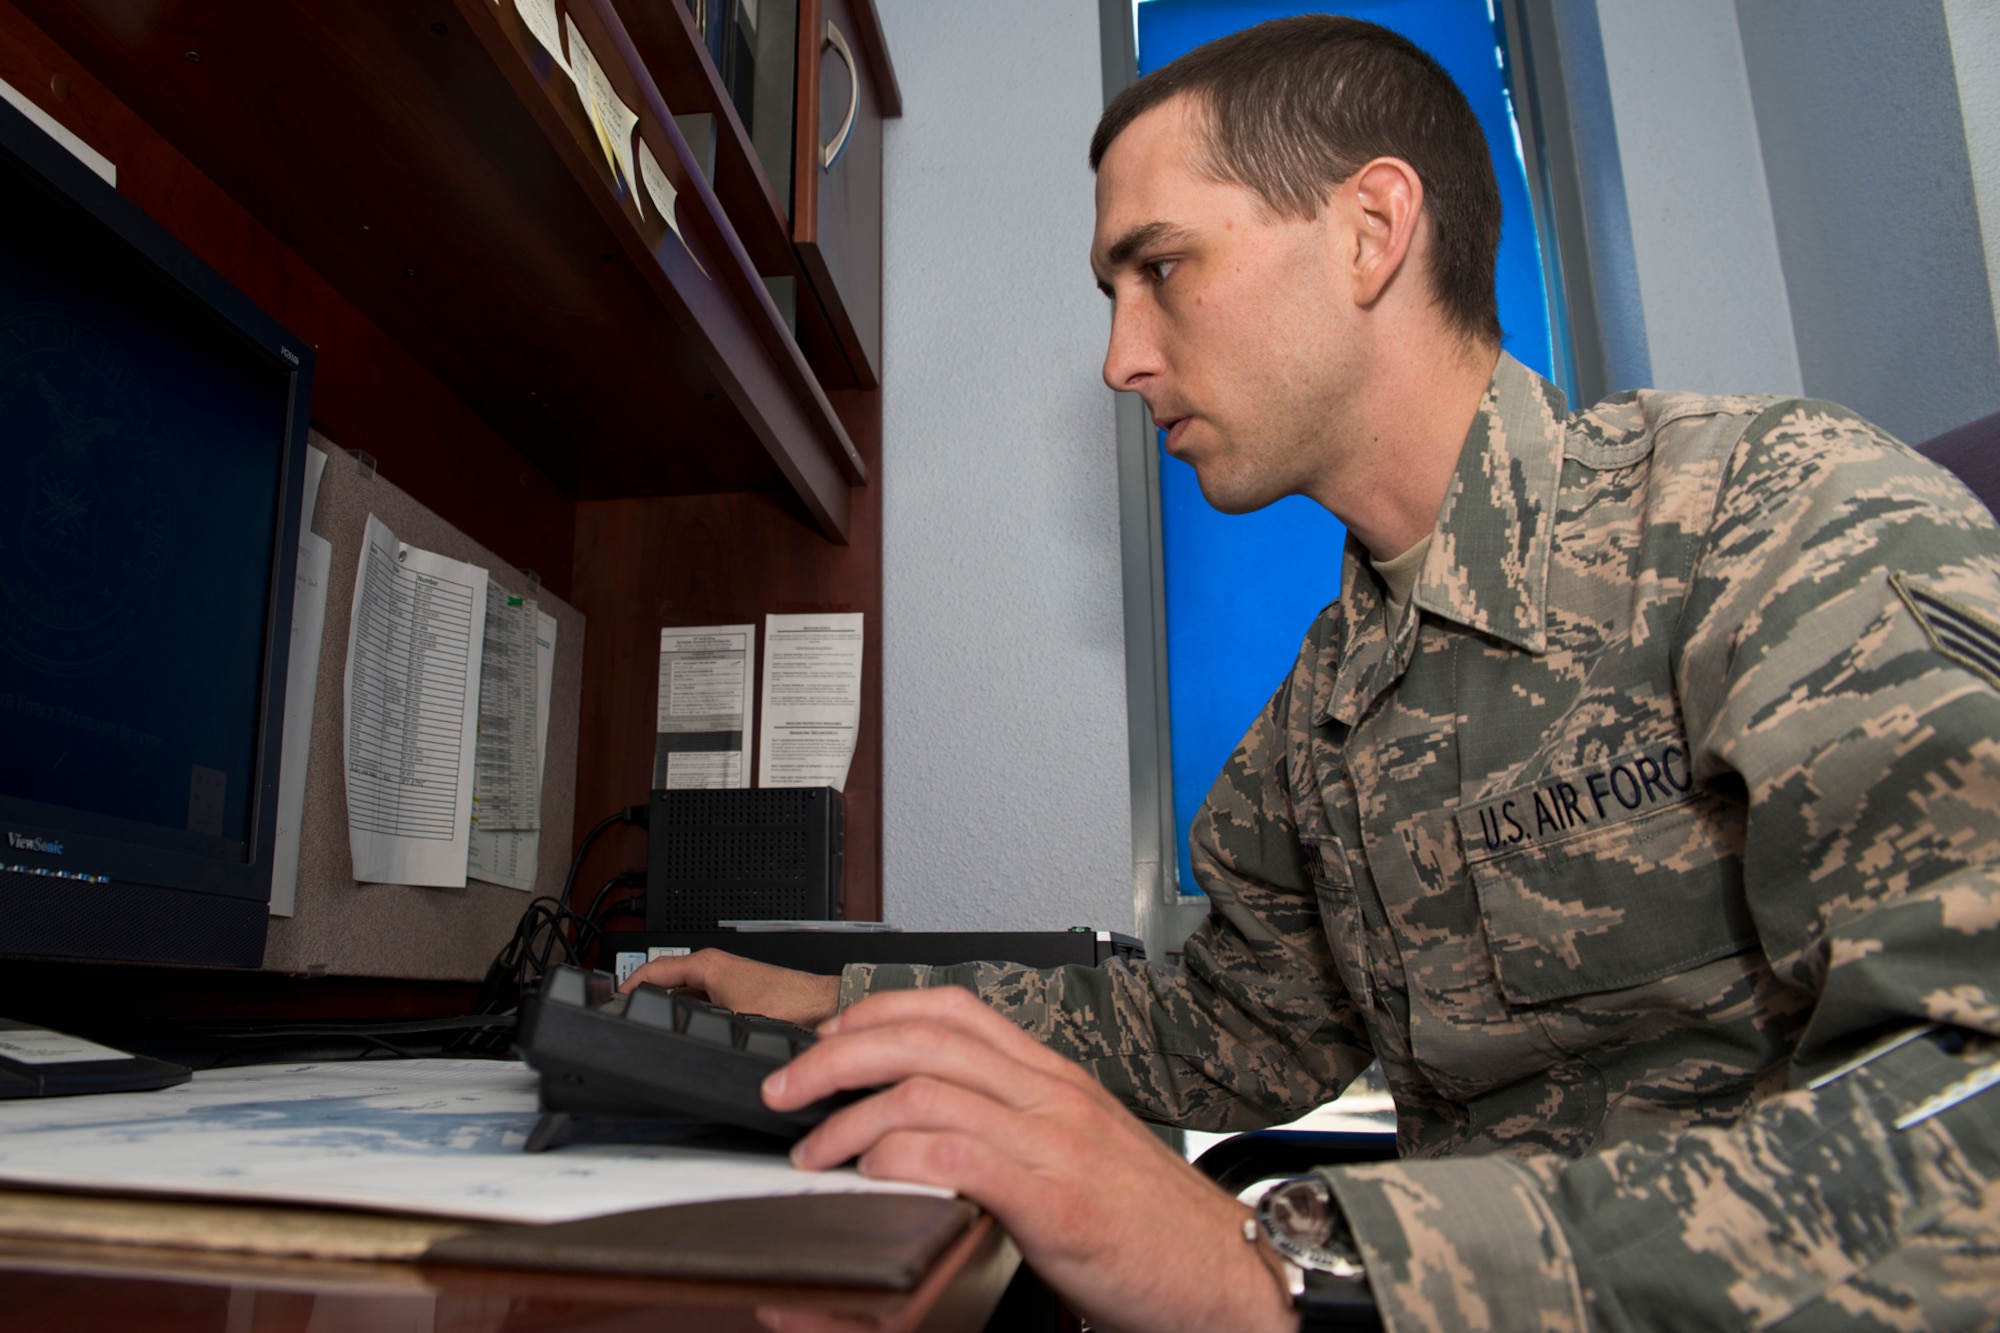 U.S. Air Force Reserve Senior Airman Justin Radford, a client systems technician assigned to the 913th Force Support Squadron, transfers user files back to a reimaged computer at Little Rock Air Force Base, Ark., March 4, 2016. From installing necessary programs to troubleshooting and repairing any problems that arise, client system technicians ensure 913th Airlift Group computer hardware and software function correctly at all times. (U.S. Air Force photo by Master Sgt. Jeff Walston/Released)  